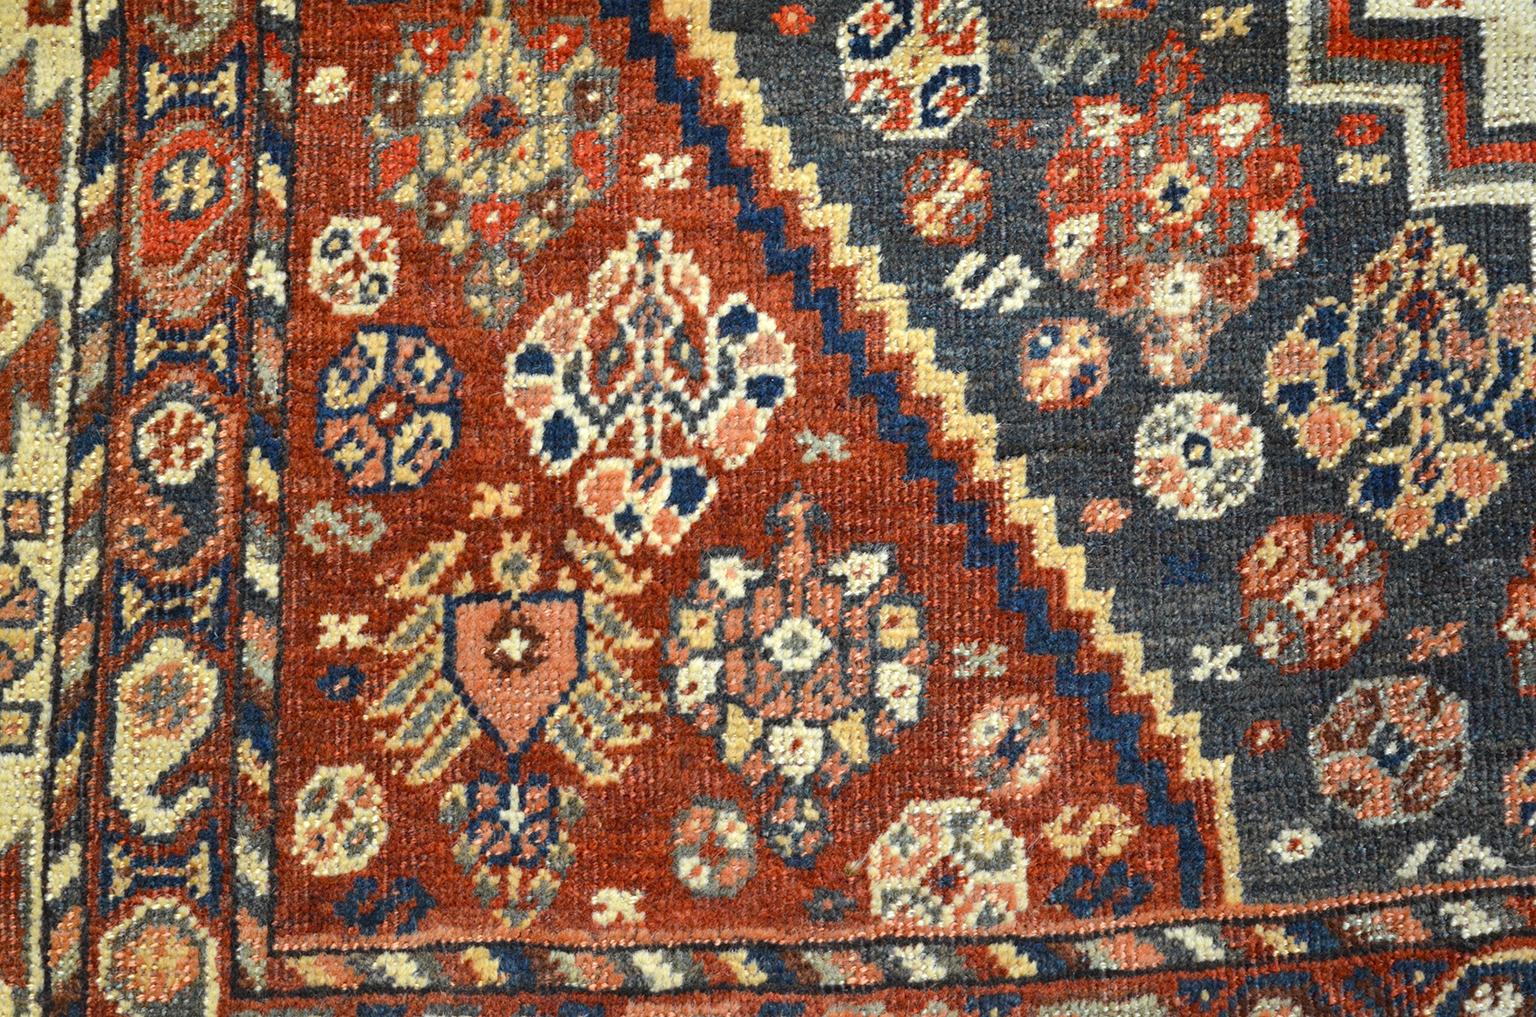 Antique 1880s Persian Qashqai Rug, Wool, Orange, Cream, Blue, 5' x 6' In Good Condition For Sale In New York, NY